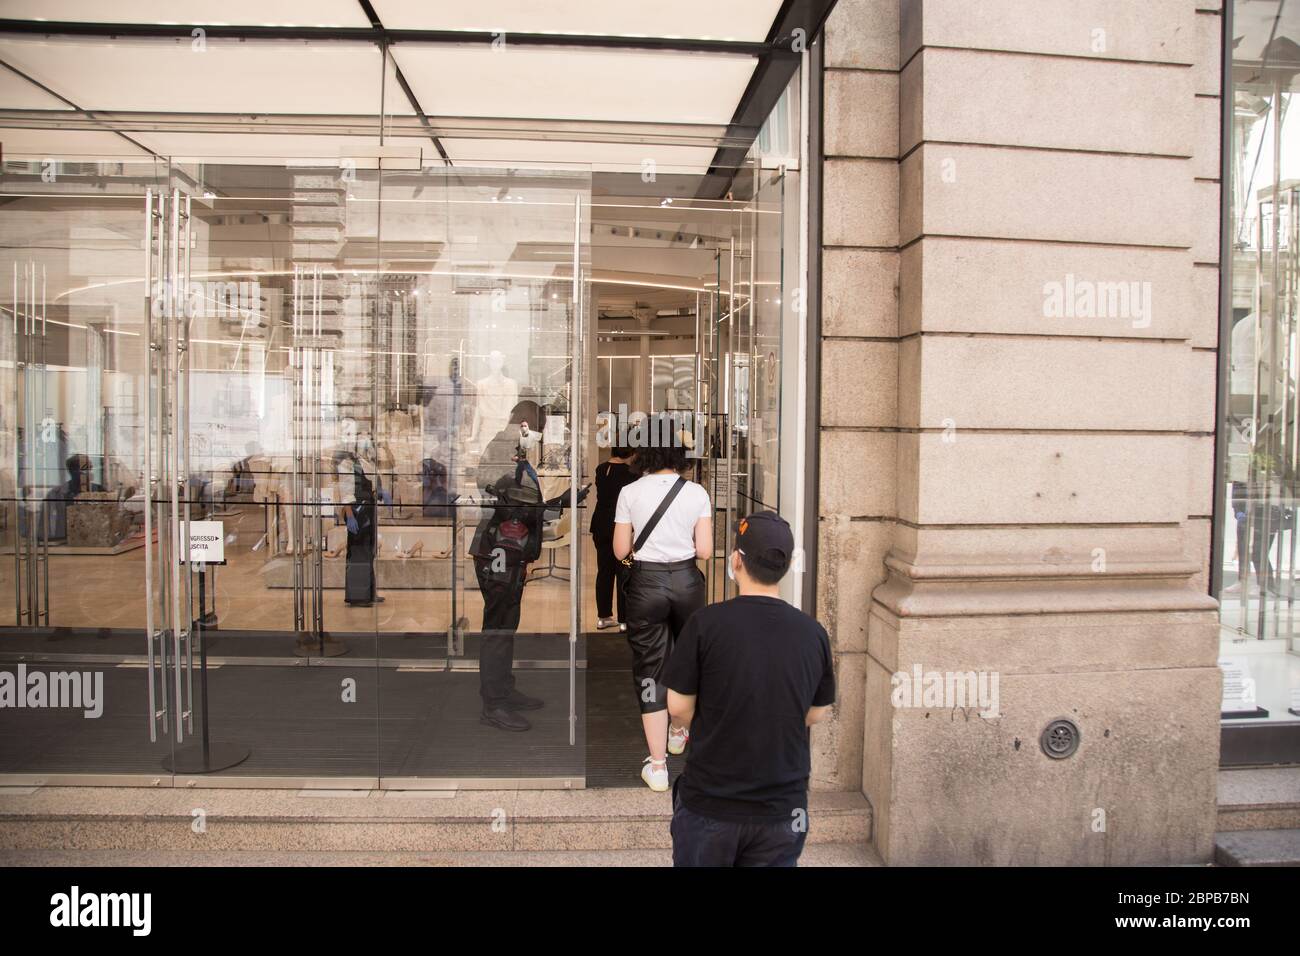 Rome, Italy. 18th May, 2020. People lined up in front of Zara store in Via  del Corso in Rome, Italy on May 18, 2020. The clothing stores have  reopened, with the safety